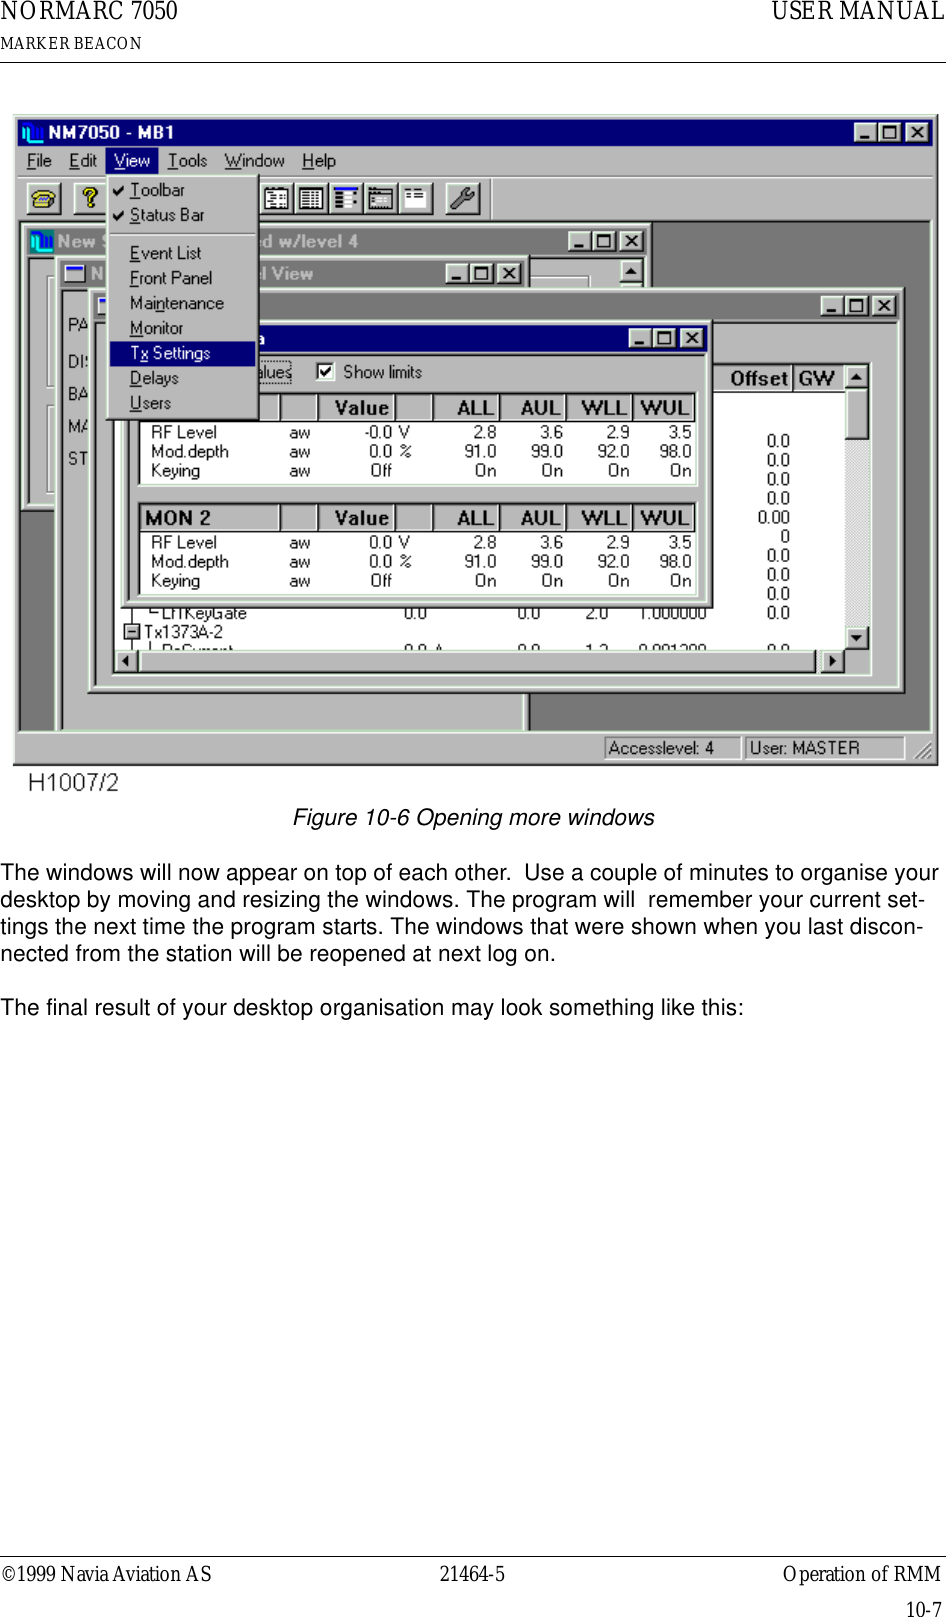 ©1999 Navia Aviation AS 21464-5 Operation of RMMUSER MANUALNORMARC 7050MARKER BEACON10-7Figure 10-6 Opening more windowsThe windows will now appear on top of each other.  Use a couple of minutes to organise your desktop by moving and resizing the windows. The program will  remember your current set-tings the next time the program starts. The windows that were shown when you last discon-nected from the station will be reopened at next log on.The final result of your desktop organisation may look something like this: